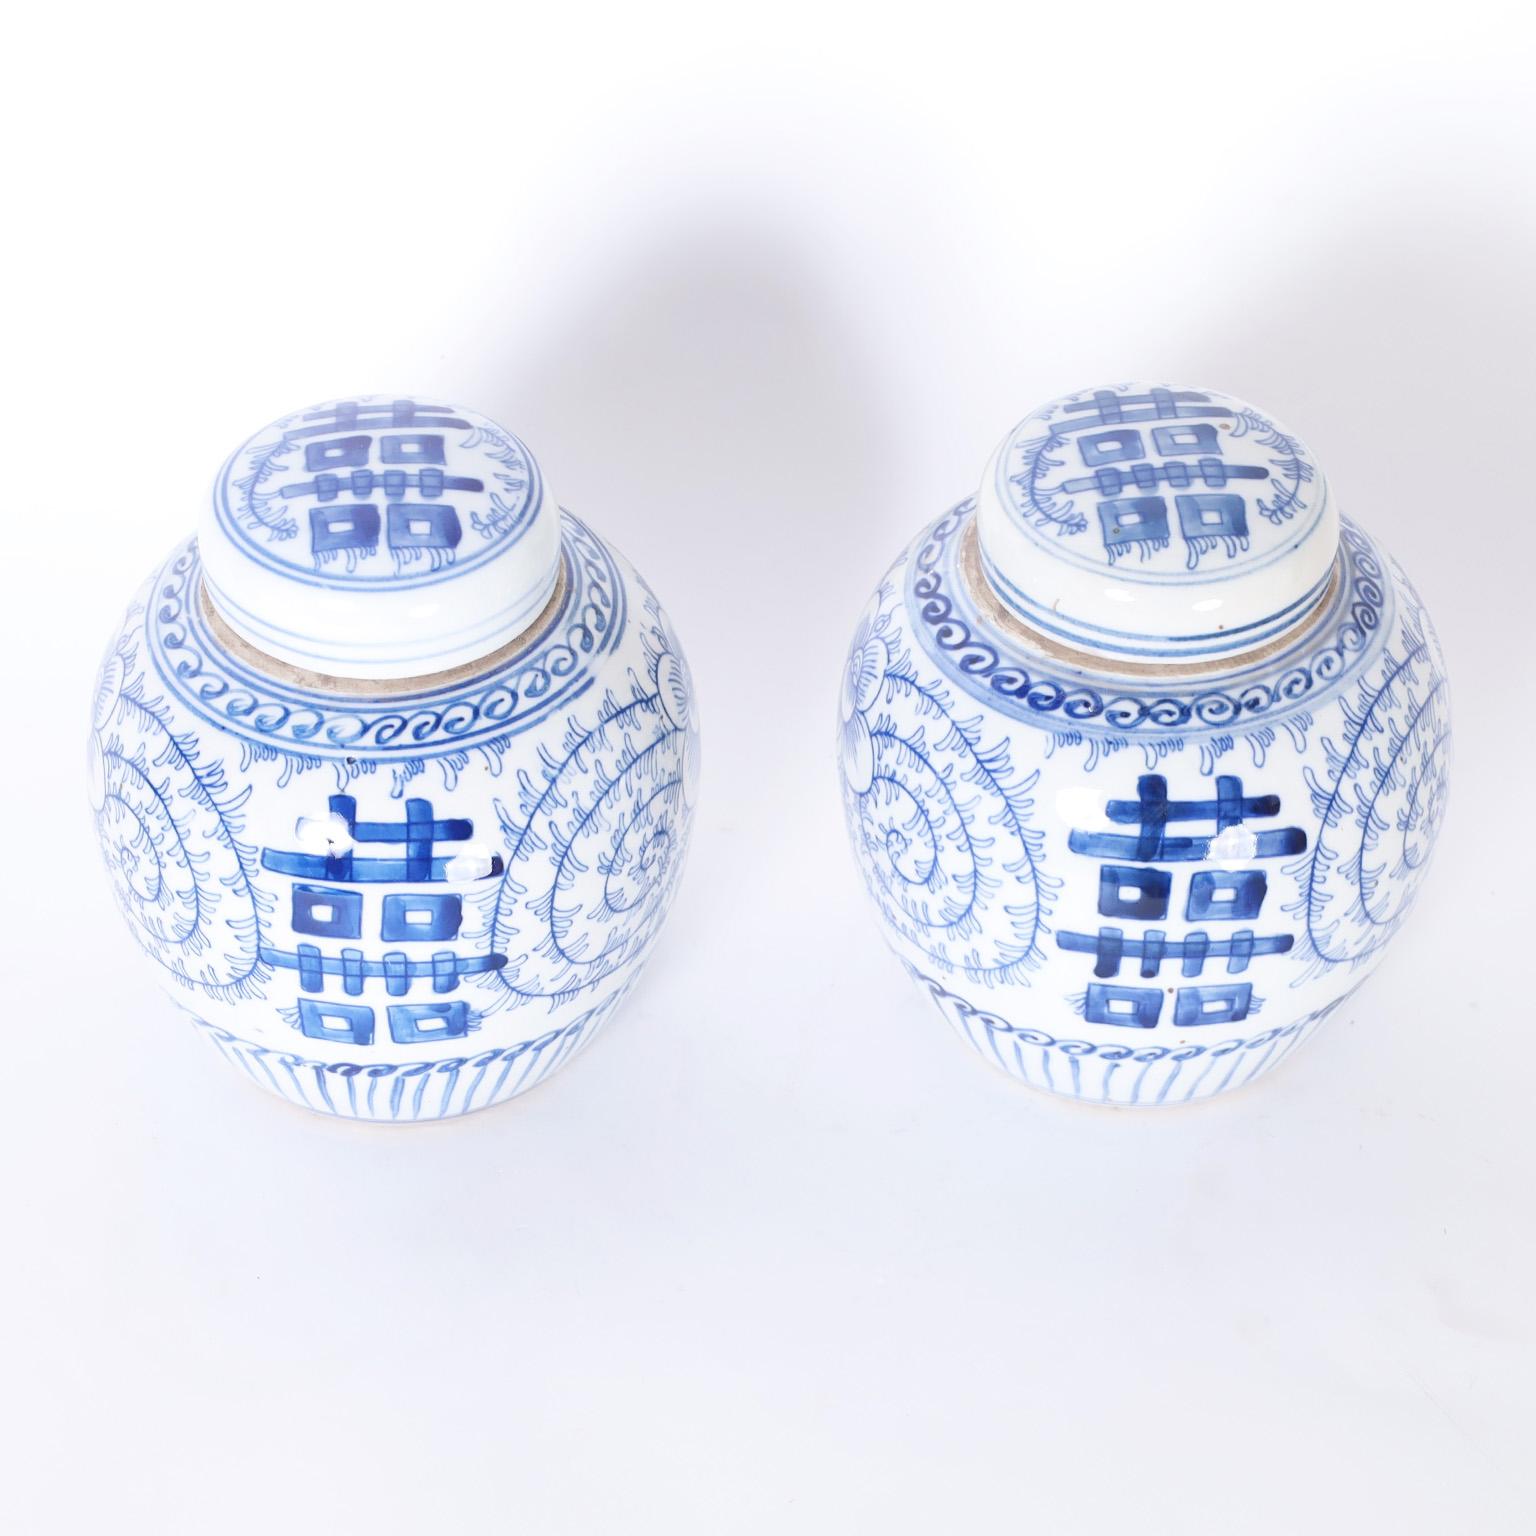 Originally a wish for a happy marriage the double happiness symbol is iconic, here we present a pair of lidded tea caddies hand decorated with a floral background.